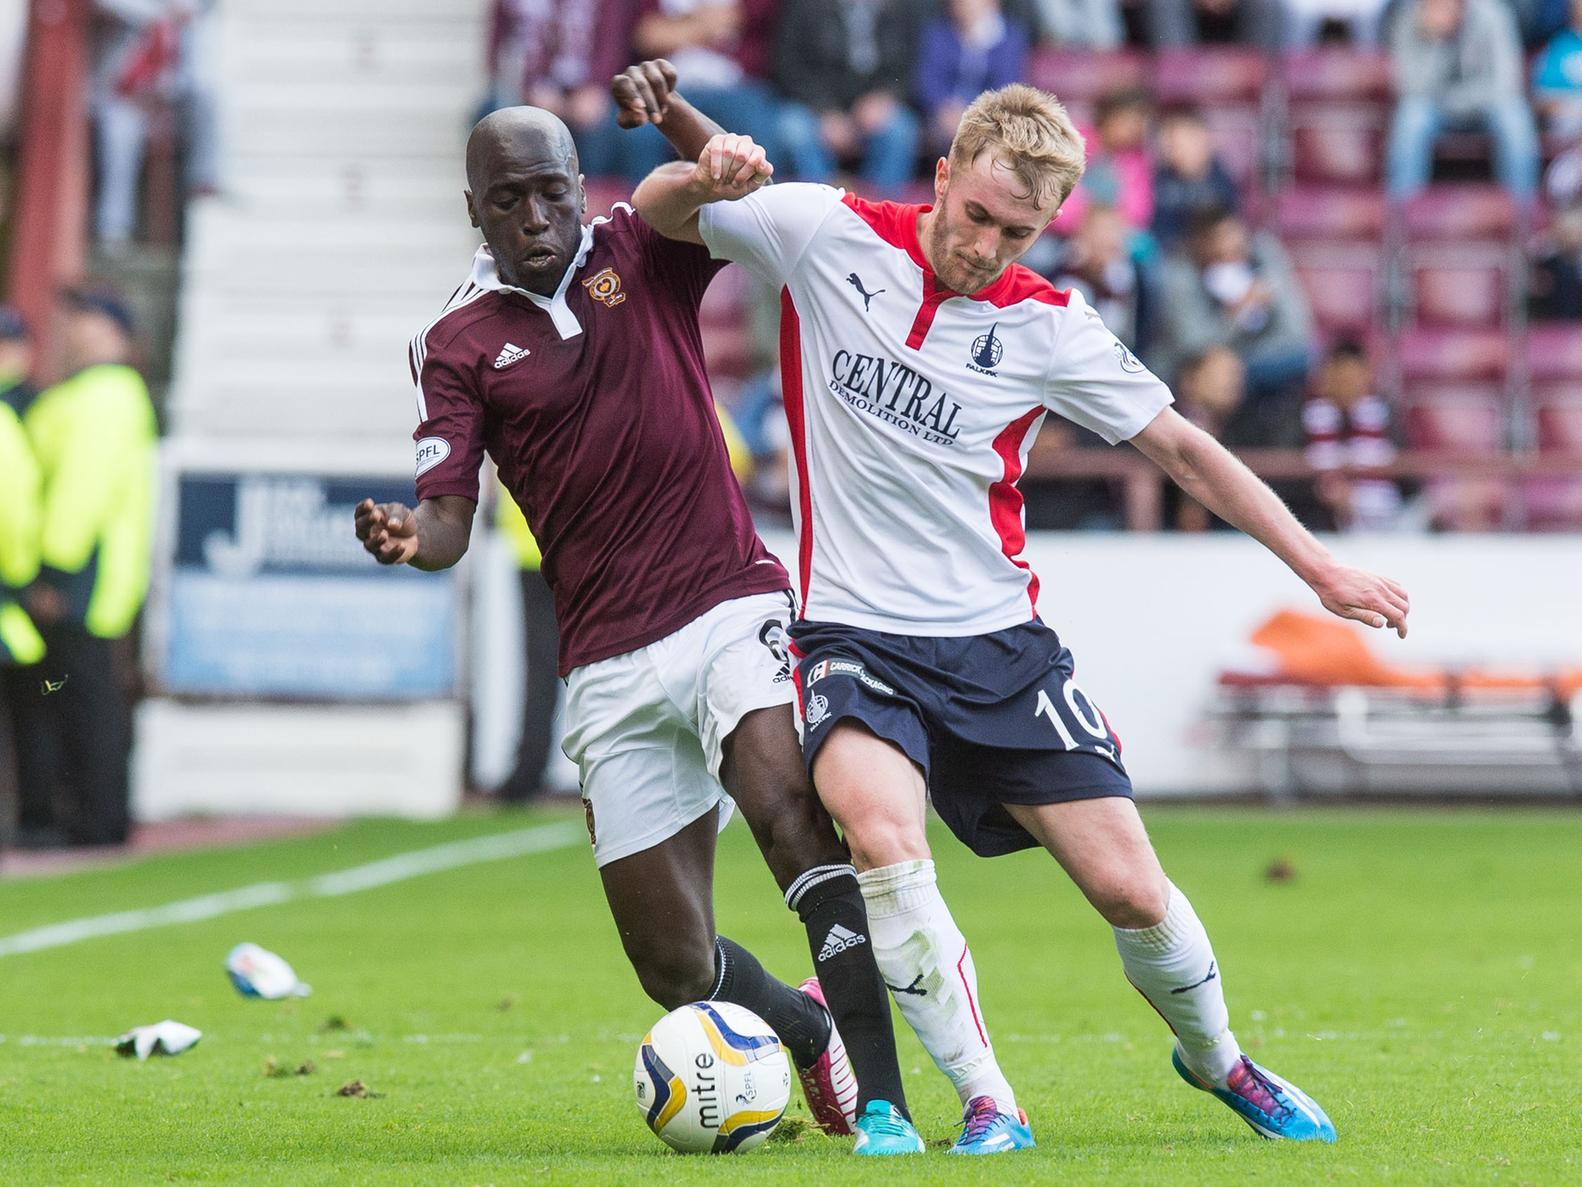 Botti Bia Bi netted a late consolation at Tynecastle as the Bairns went down 4-1 to ten man Hearts early in to the 2014/15 season